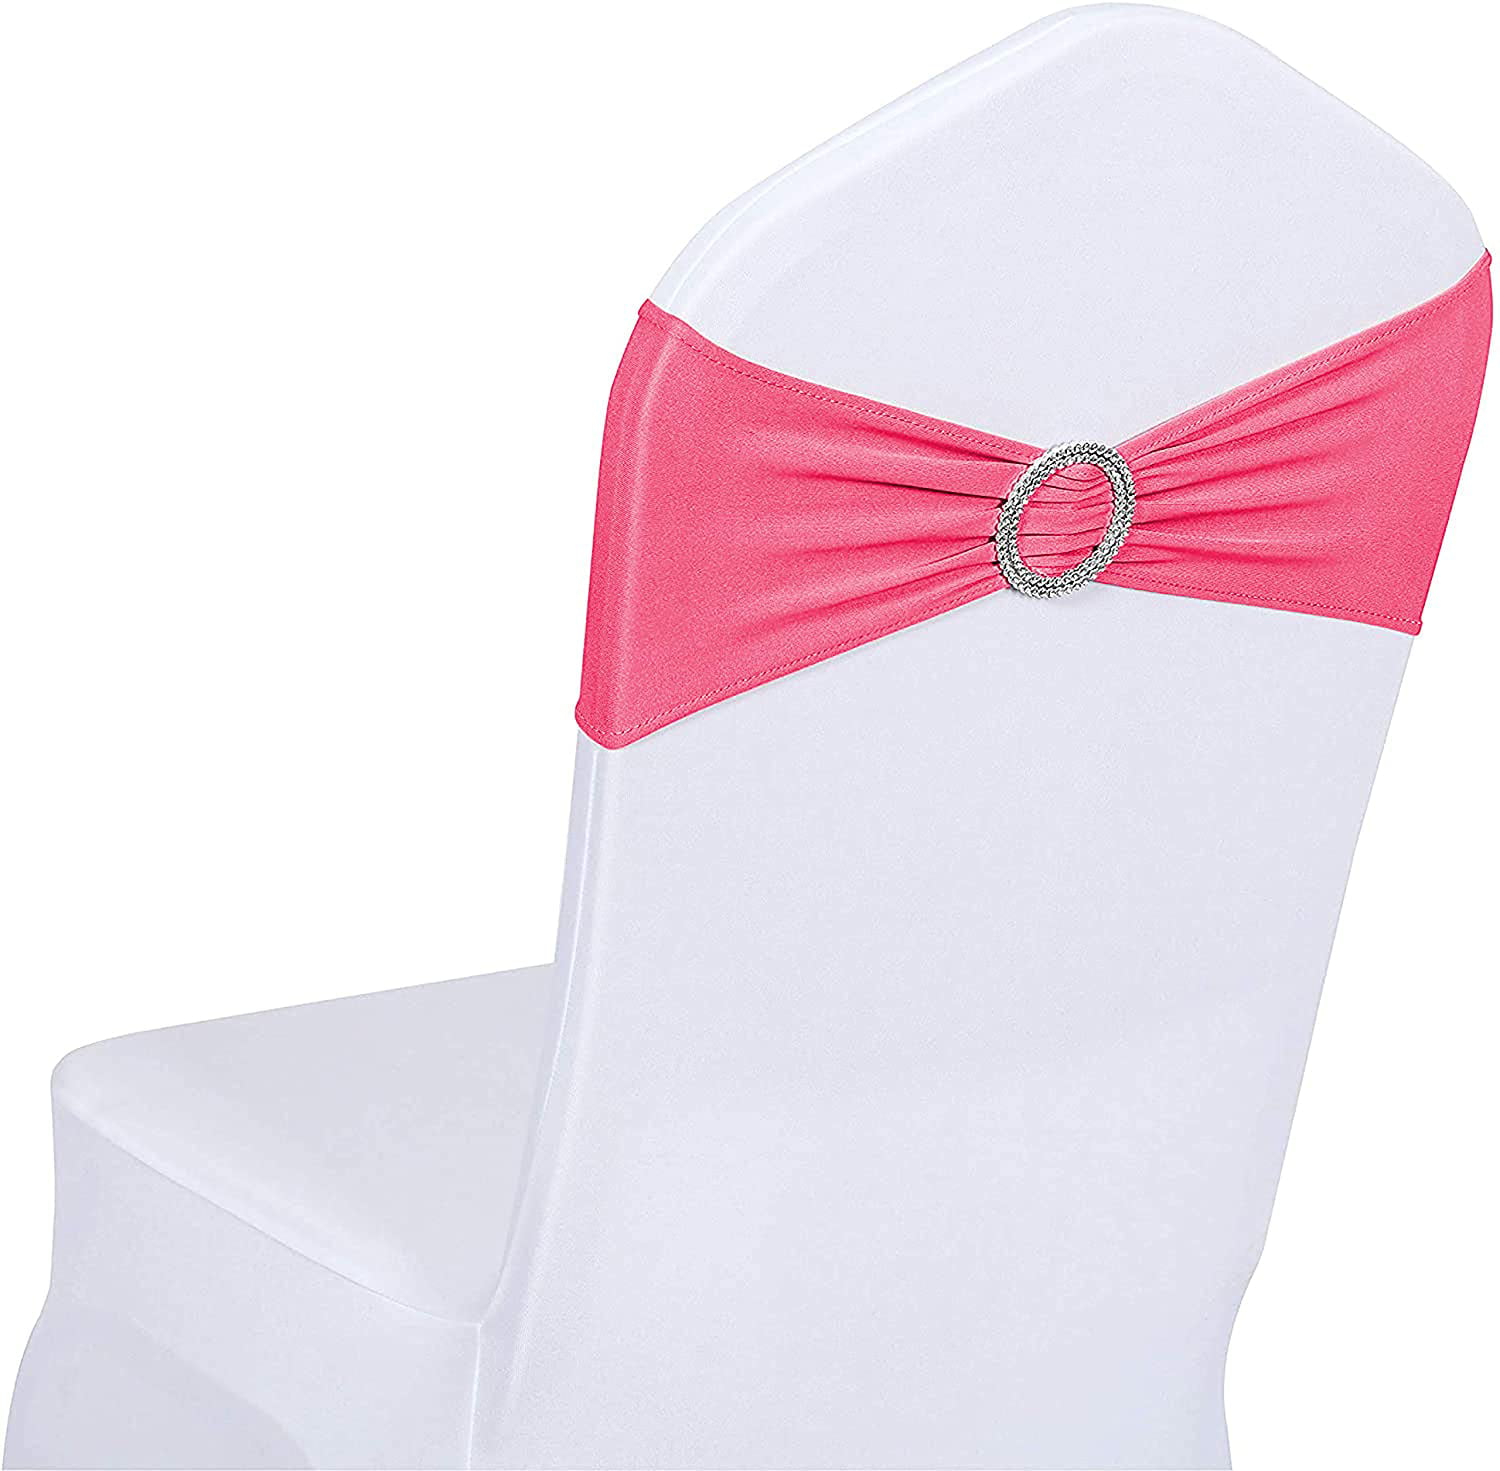 10/20x Spandex Stretch Wedding Party Chair Cover Band Bow Sashes w/ Flower Decor 